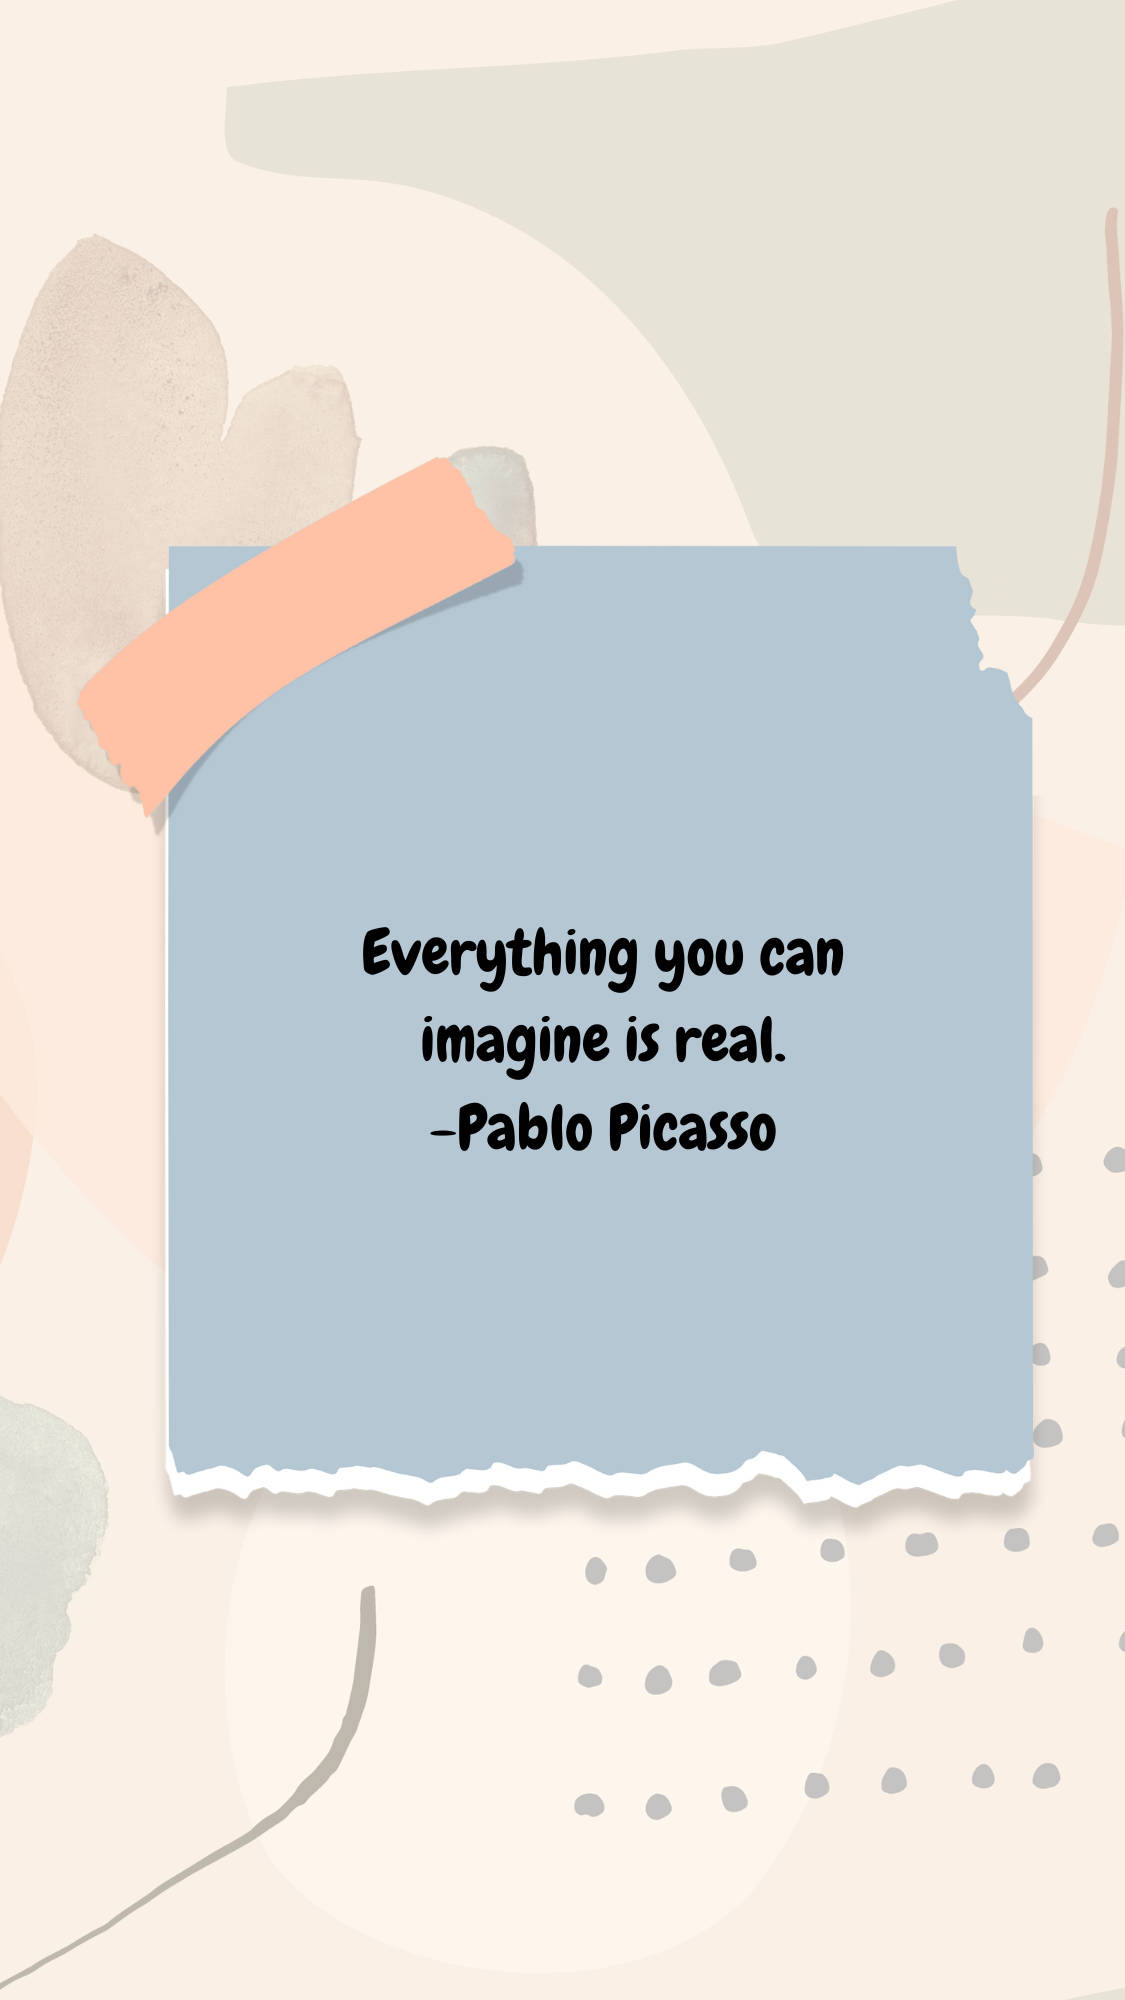 Download Pablo Picasso Motivational Quotes Aesthetic Wallpaper | Wallpapers .com